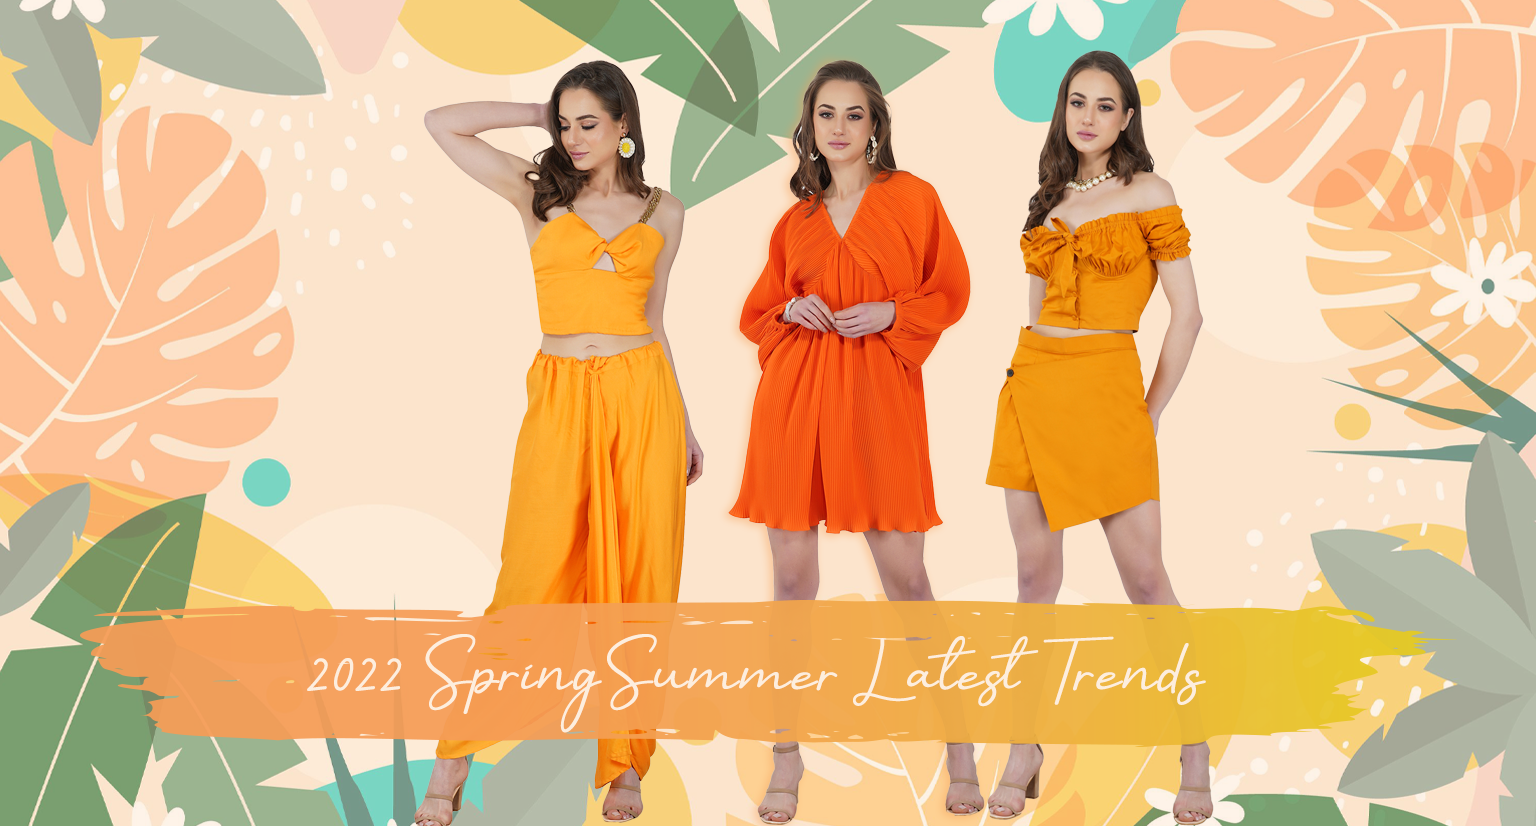 Spring Summer Collection